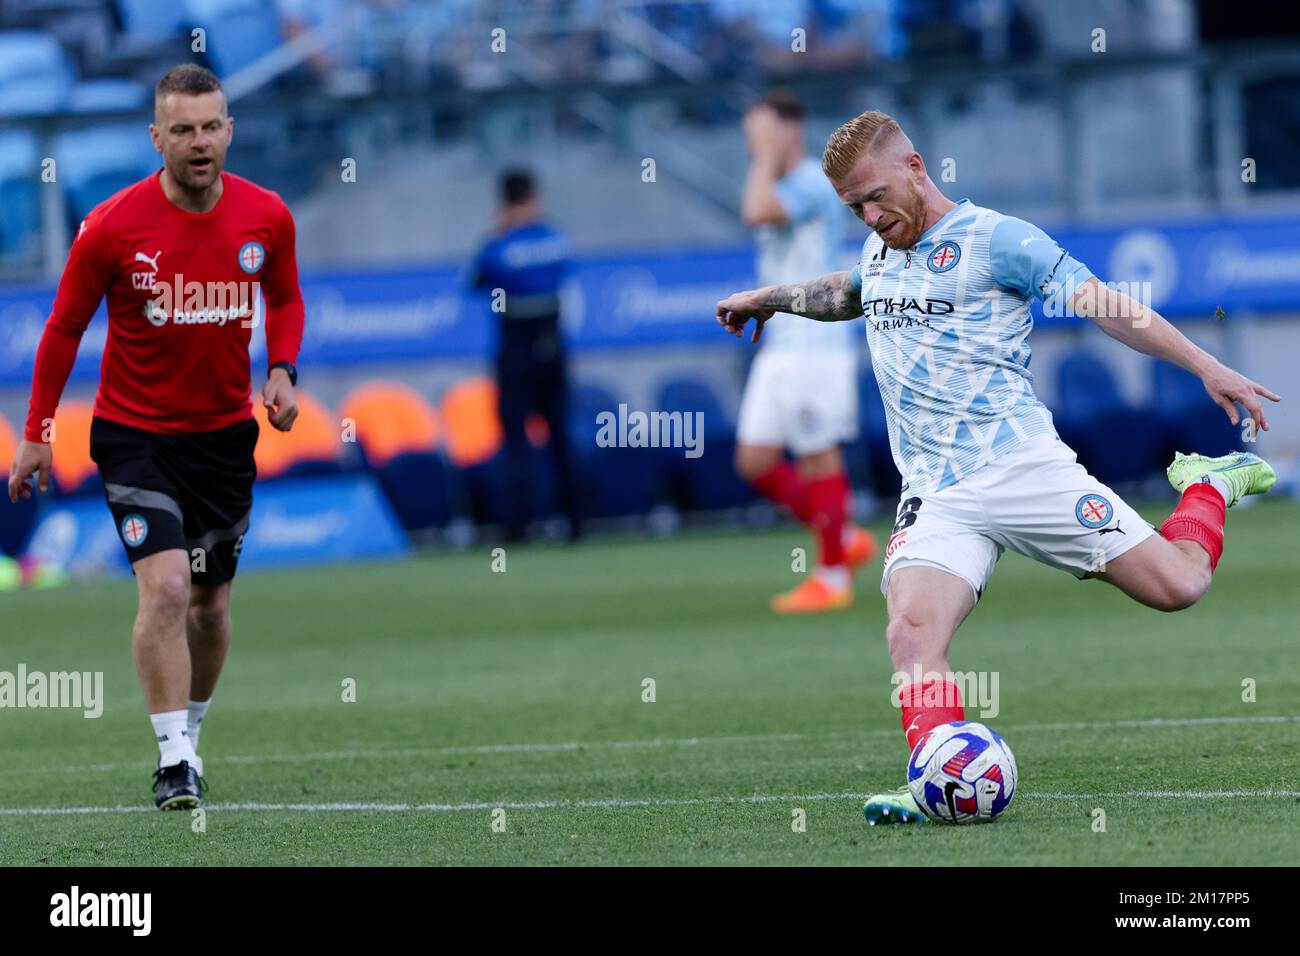 Sydney, Australia. 10th Dec, 2022. Richard van der Venne of Melbourne City warms up before the match between Sydney FC and Melbourne City at Allianz Stadium on December 10, 2022 in Sydney, Australia Credit: IOIO IMAGES/Alamy Live News Stock Photo